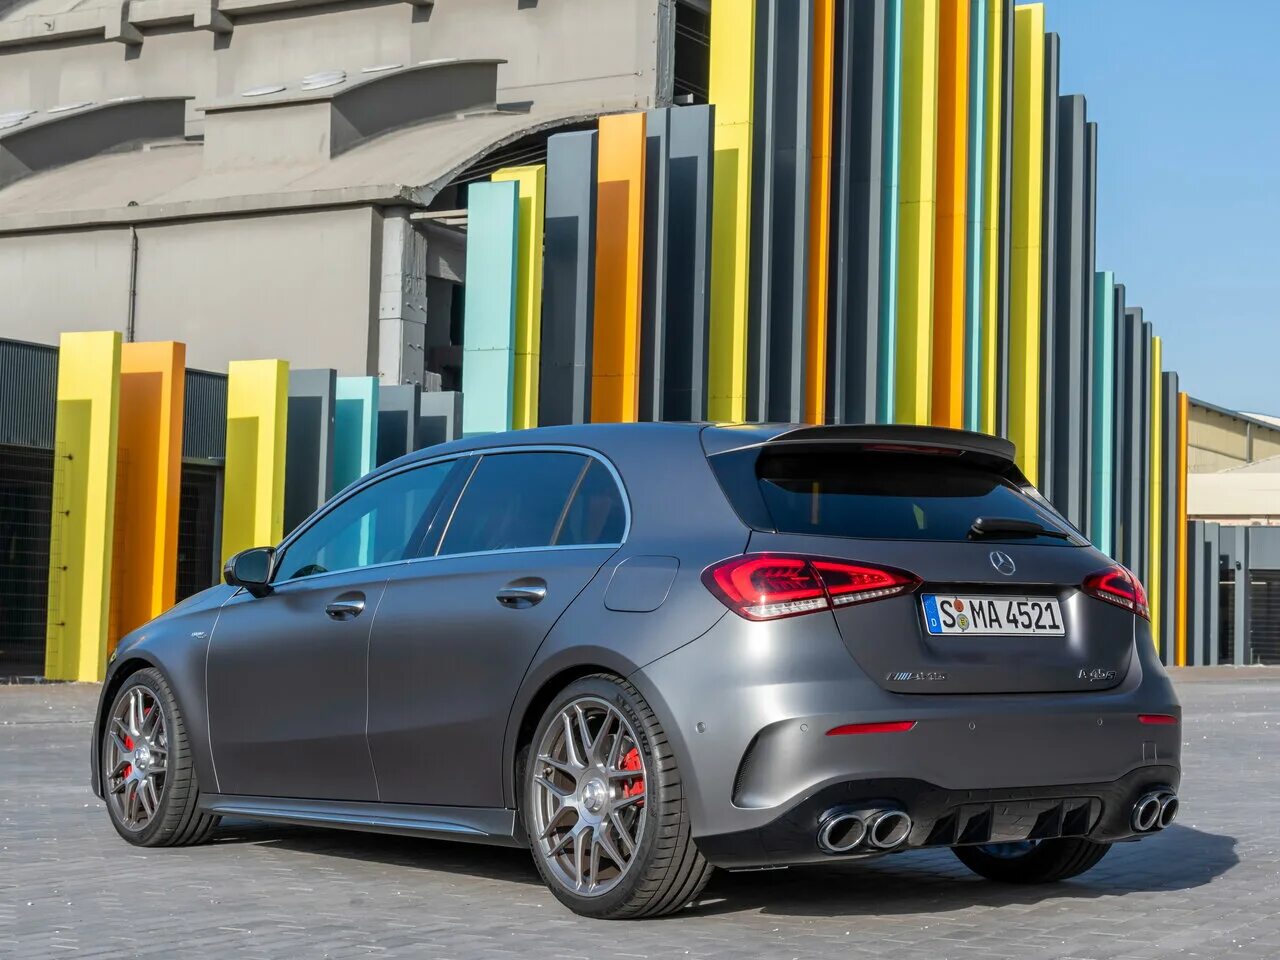 Mercedes Benz a45s AMG. Мерседес АМГ а45 хэтчбек. Мерседес a45 AMG. Mercedes-Benz a45 AMG 4matic 2020.